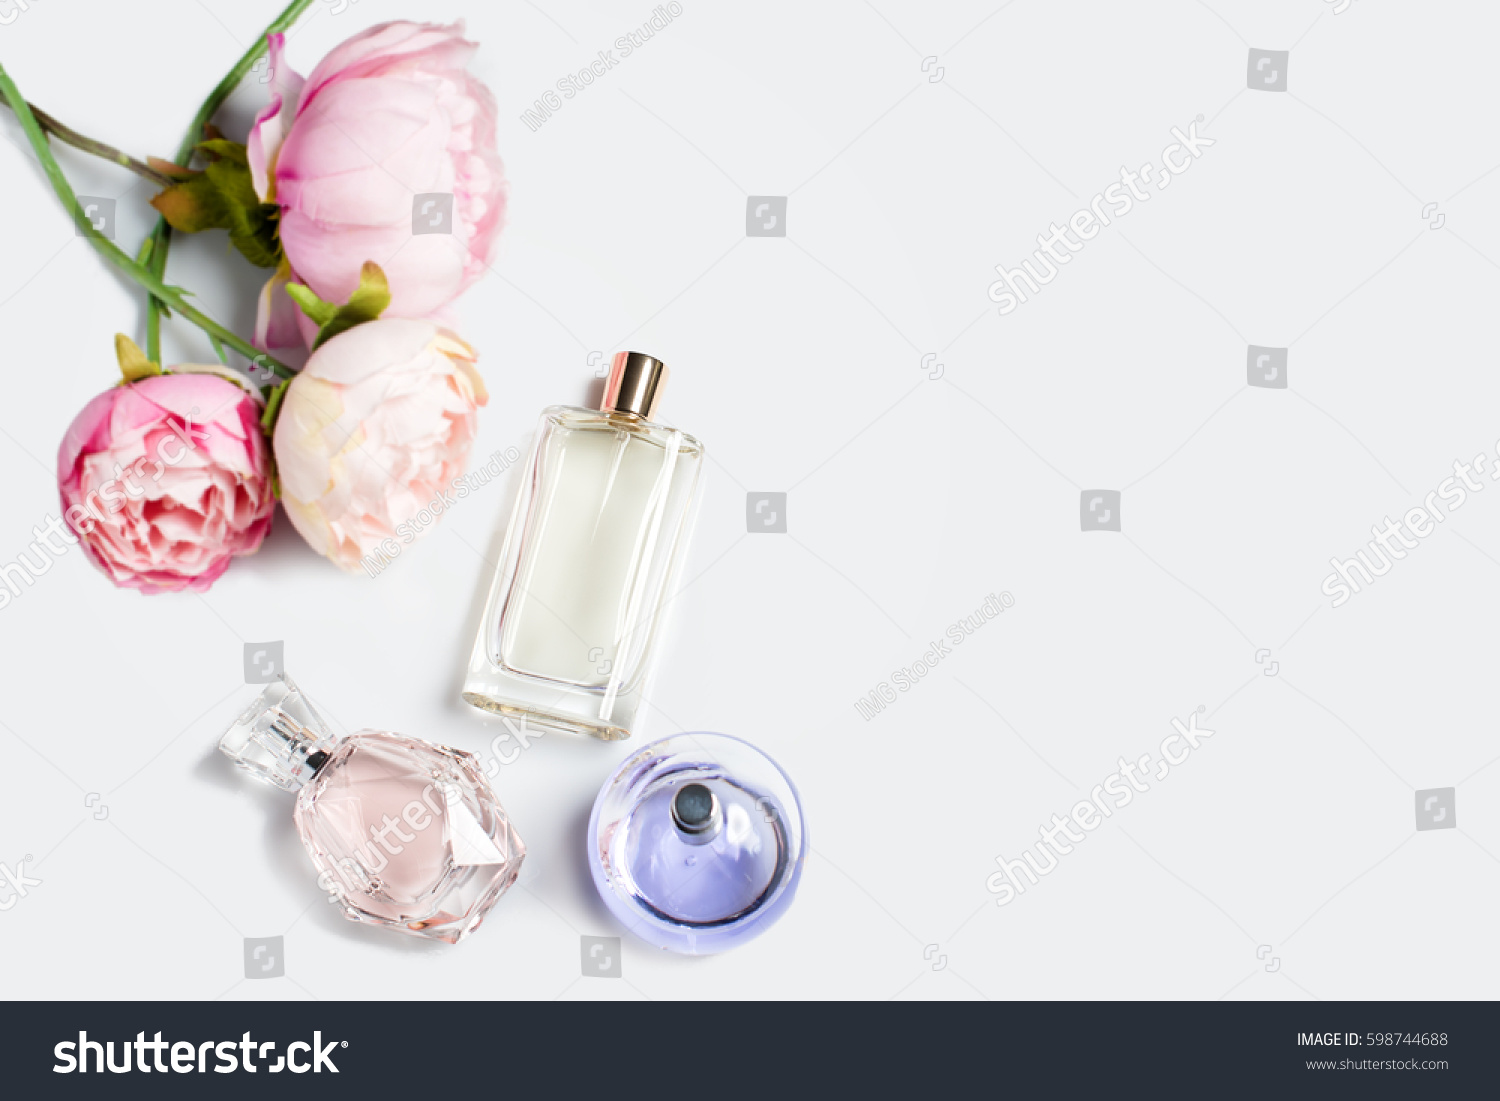 Perfume bottles with flowers on light background. Perfumery, cosmetics, fragrance collection. Free space for text. #598744688